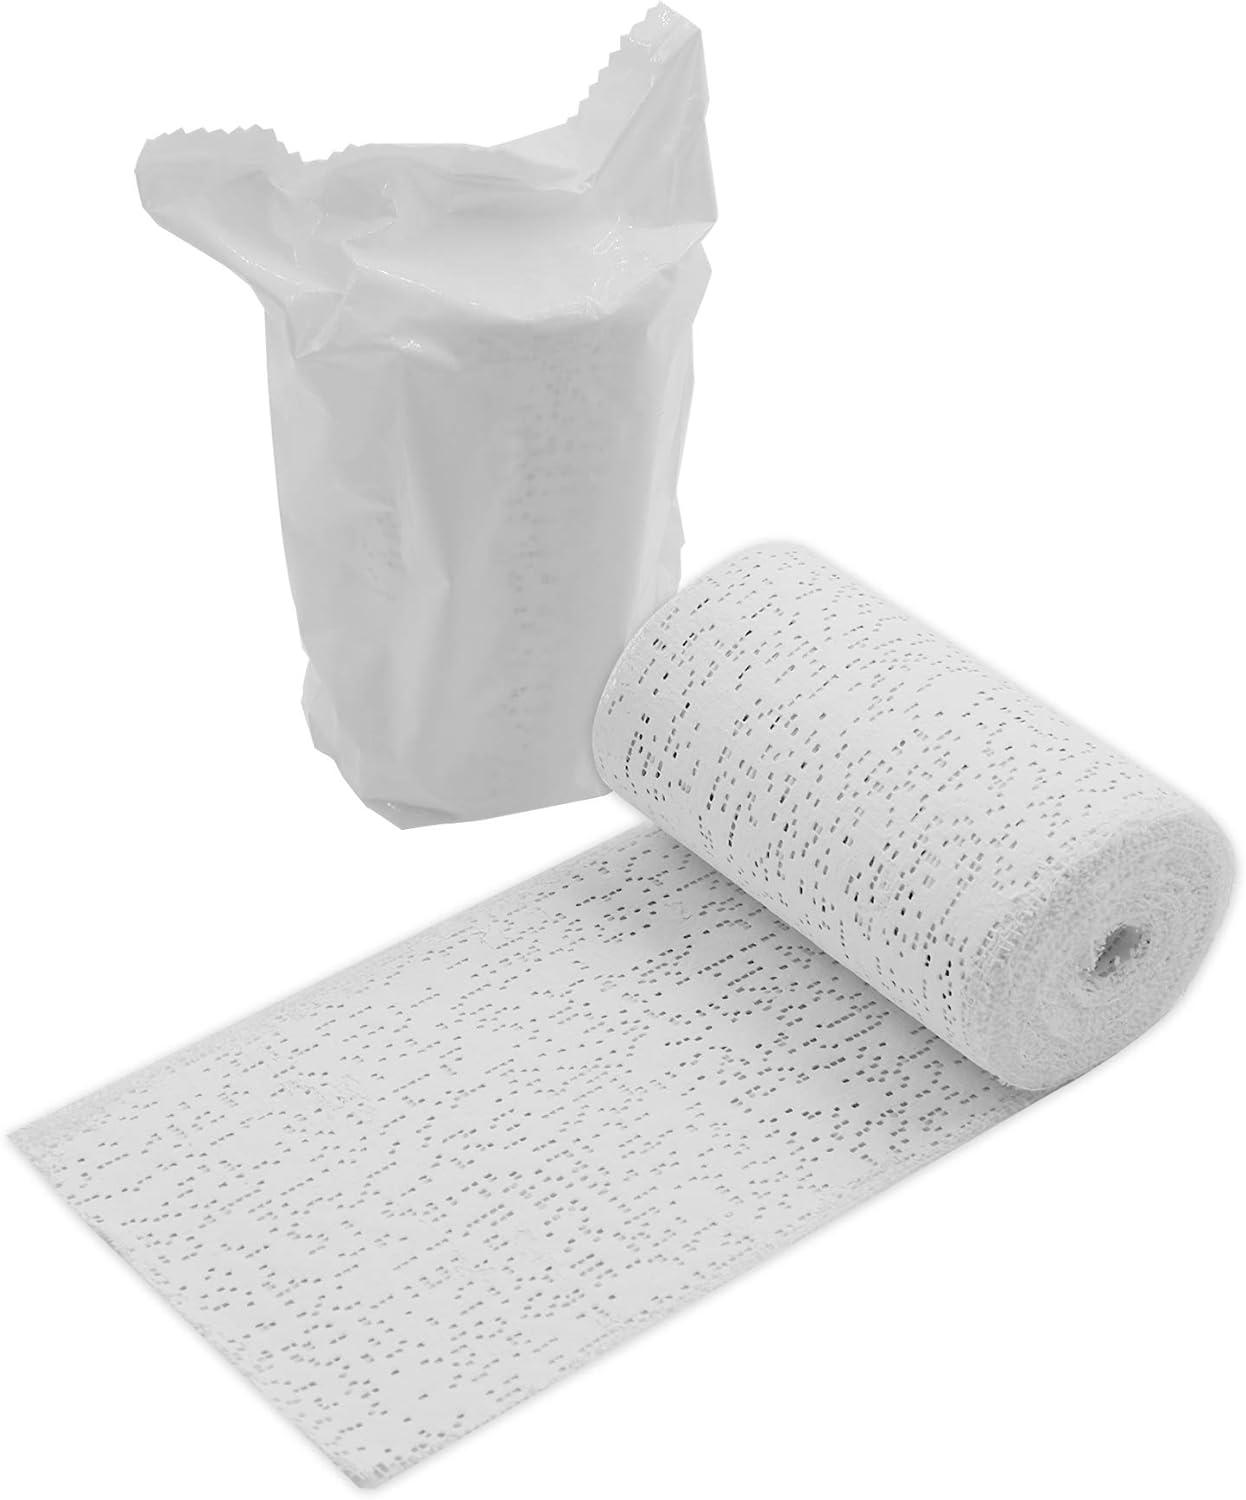 Plaster Cloth Rolls (Pack of 12) - Gauze Bandages for Body Casts Craft  Projects Belly Molds - Easy to Use Wrap Strips - 6 W x 180 L(Single Roll)  6x180